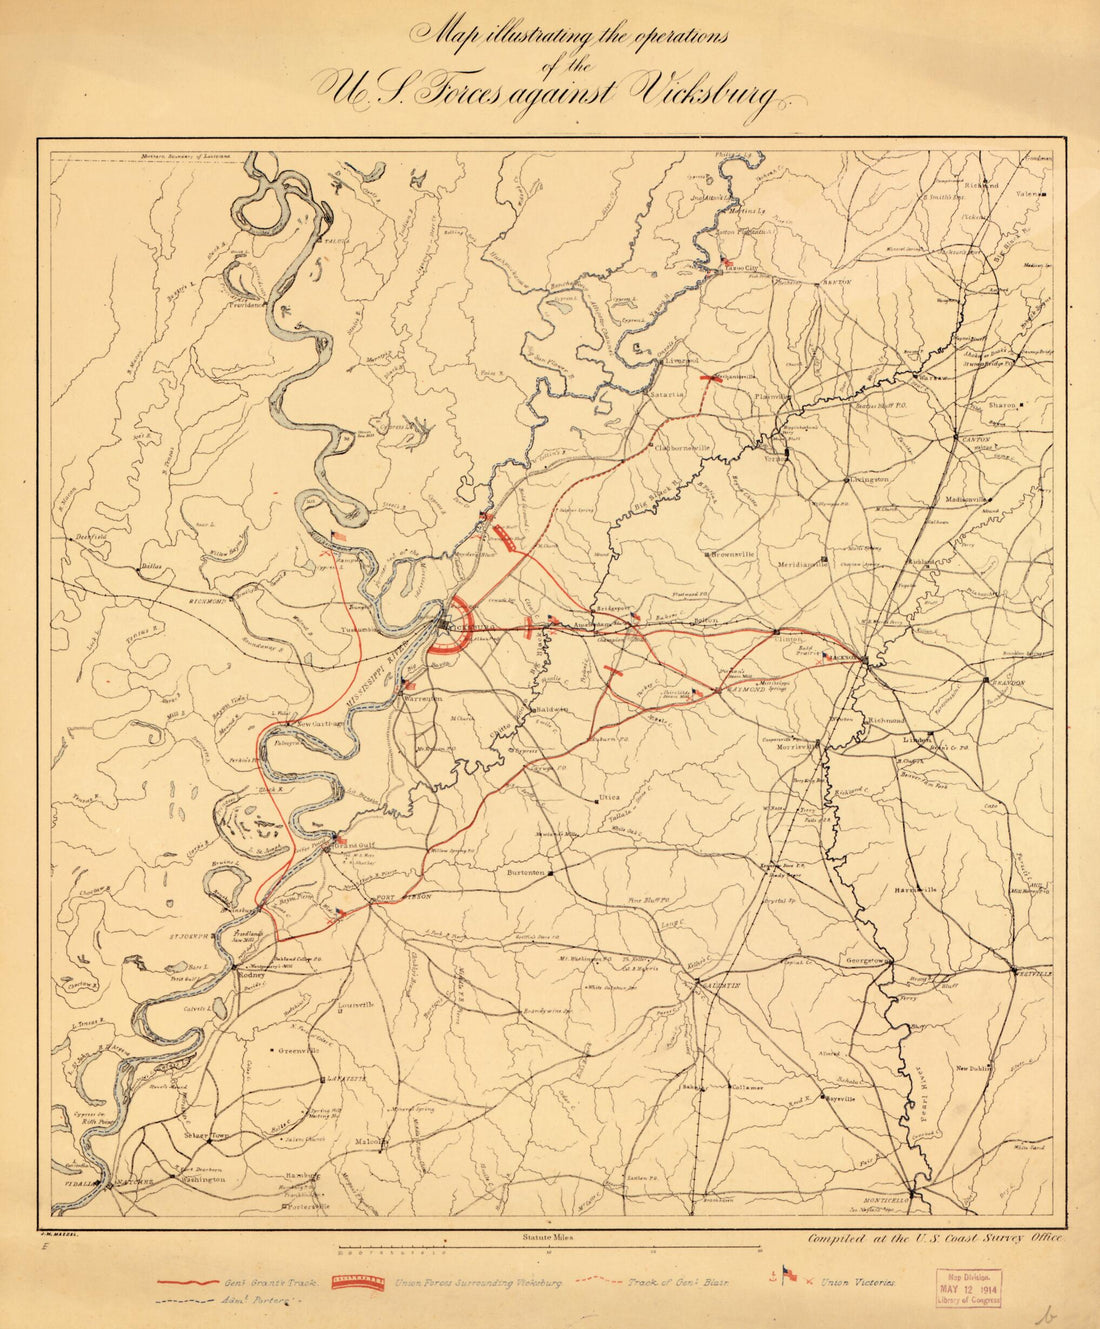 This old map of Map Illustrating the Operations of U.S. Forces Against Vicksburg from 1863 was created by J. W. Maedel,  United States Coast Survey in 1863